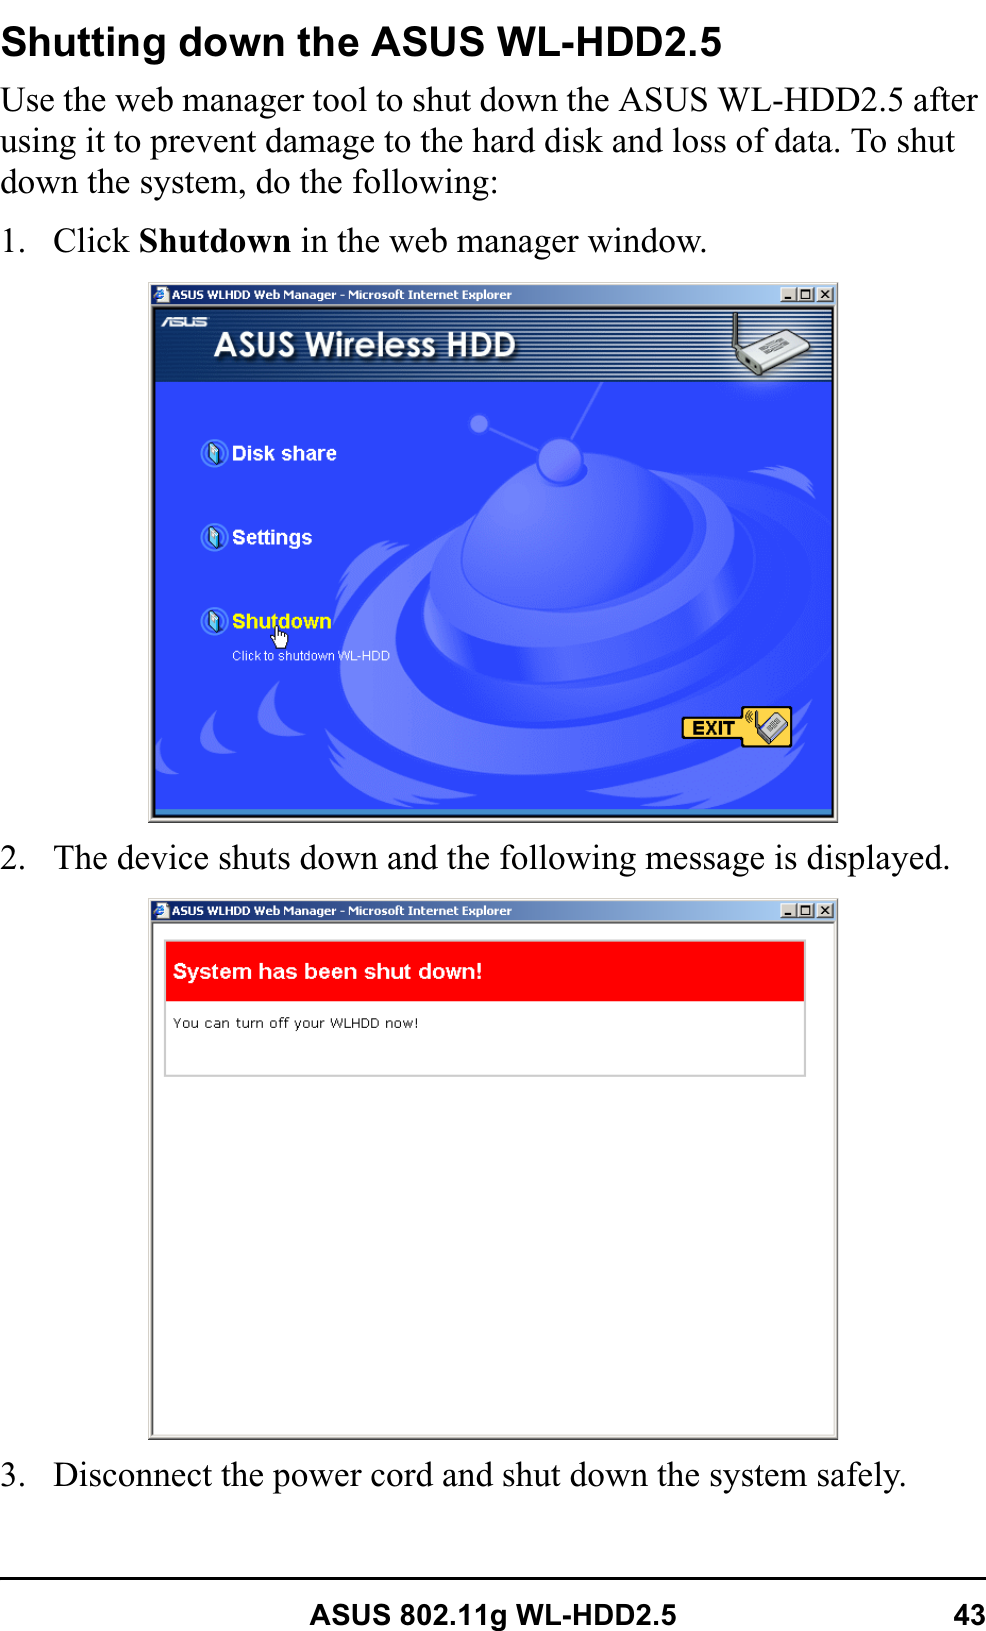 ASUS 802.11g WL-HDD2.5 43Shutting down the ASUS WL-HDD2.5Use the web manager tool to shut down the ASUS WL-HDD2.5 after using it to prevent damage to the hard disk and loss of data. To shut down the system, do the following:1. Click Shutdown in the web manager window.2. The device shuts down and the following message is displayed.3. Disconnect the power cord and shut down the system safely.